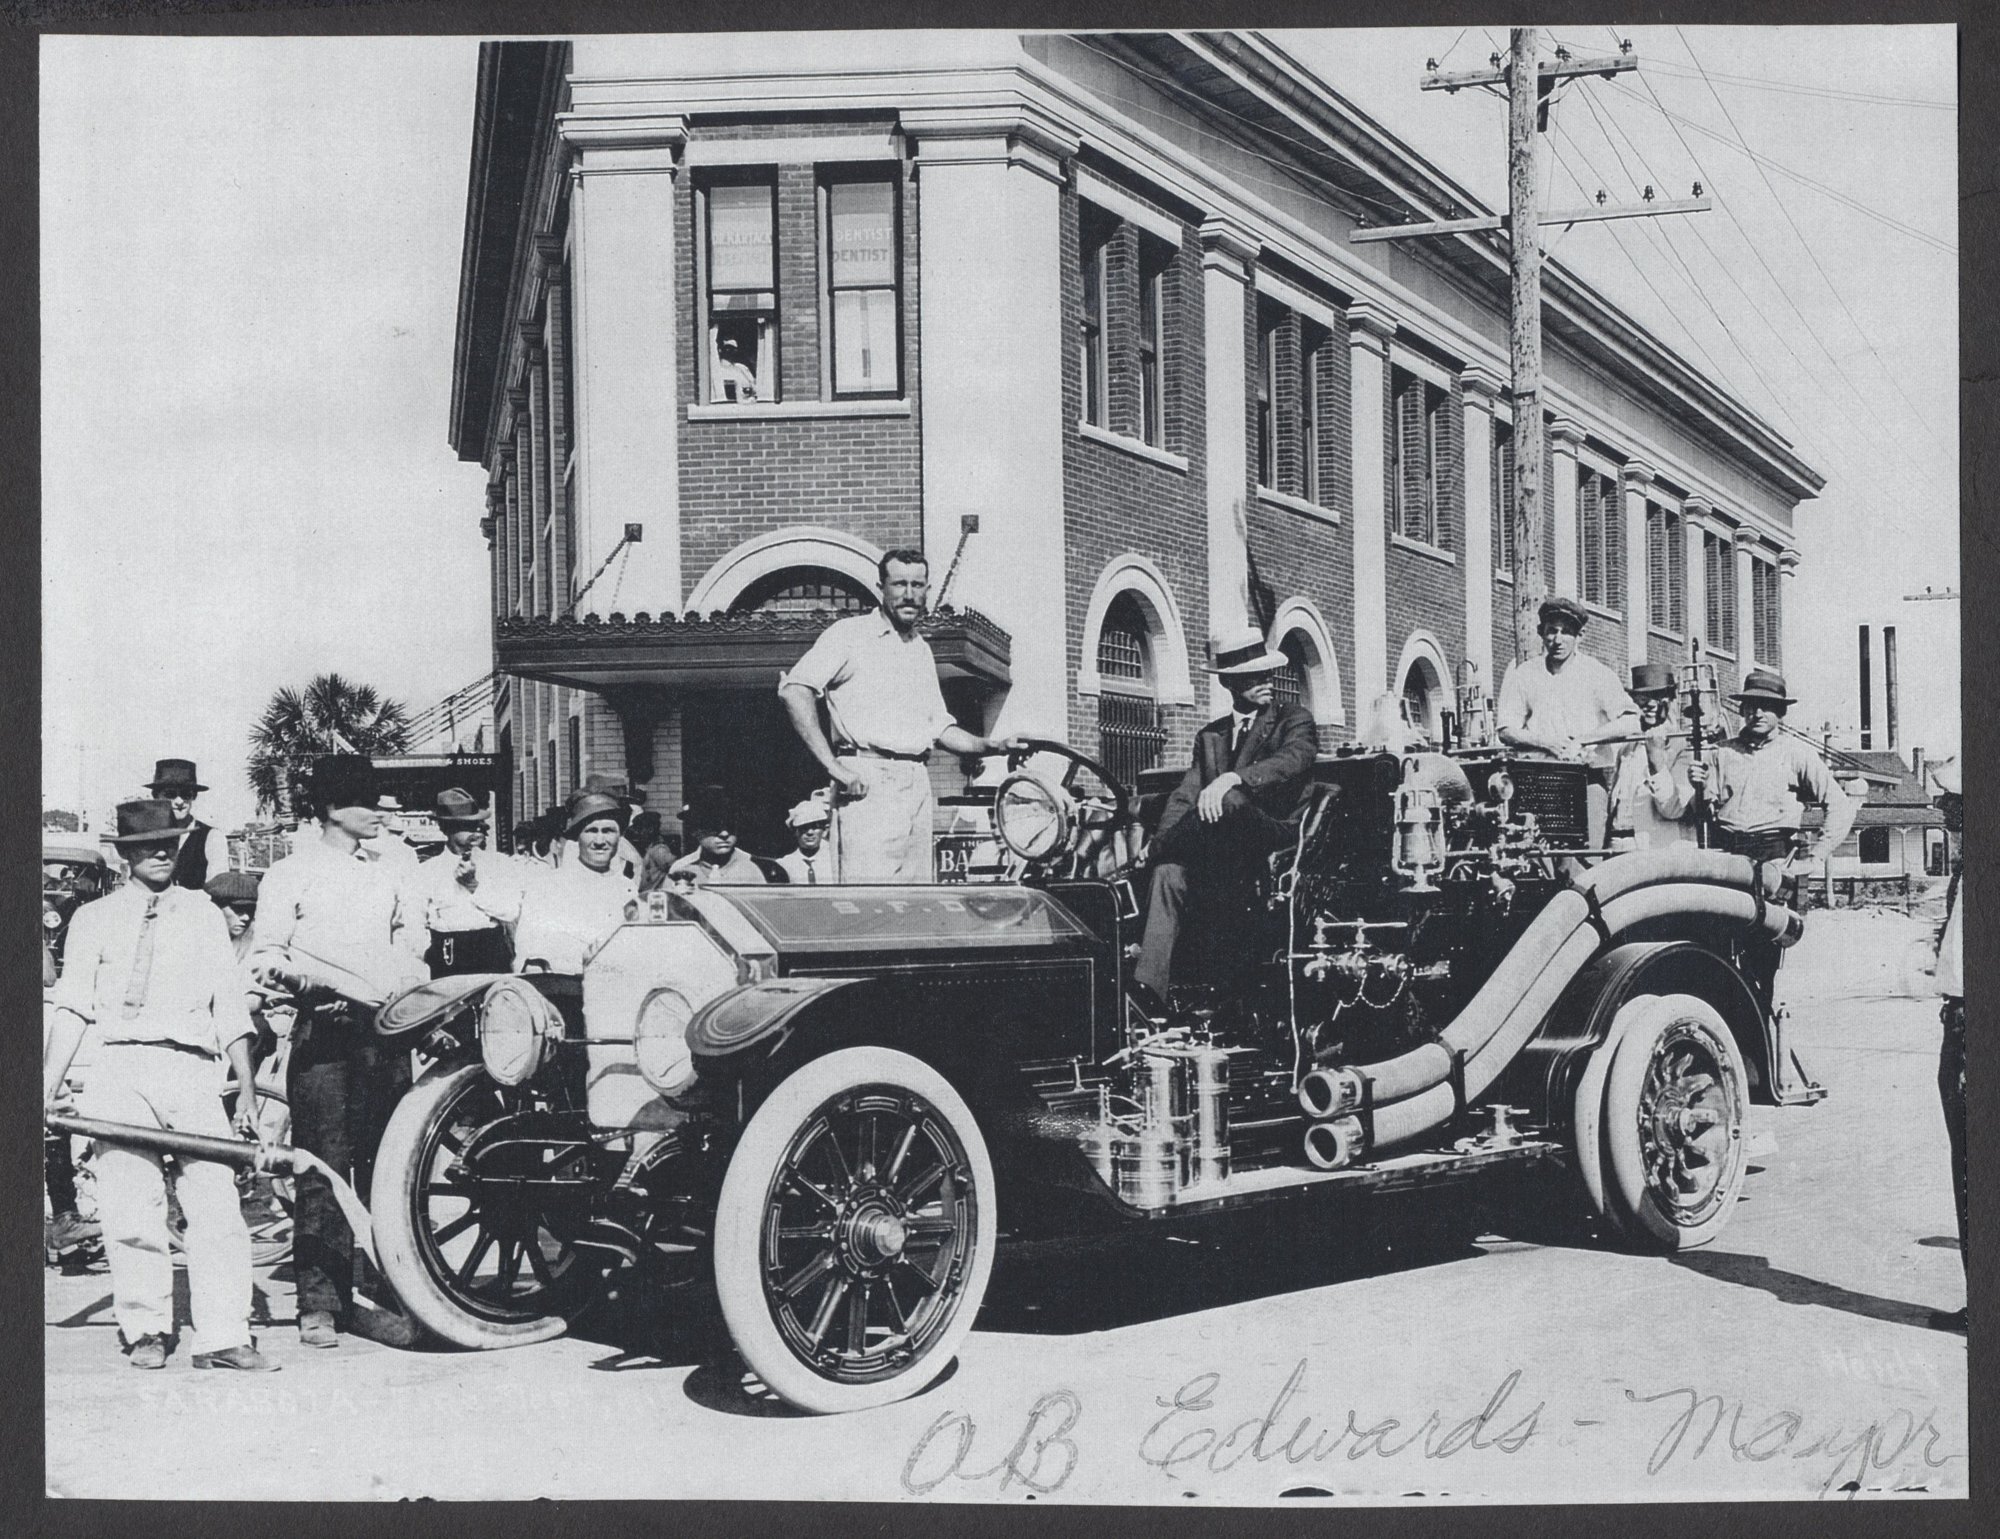 A.B. Edwards, the city of Sarasota's first mayor, poses on top of a fire engine. Photo courtesy Sarasota County Libraries & Historical Resources.